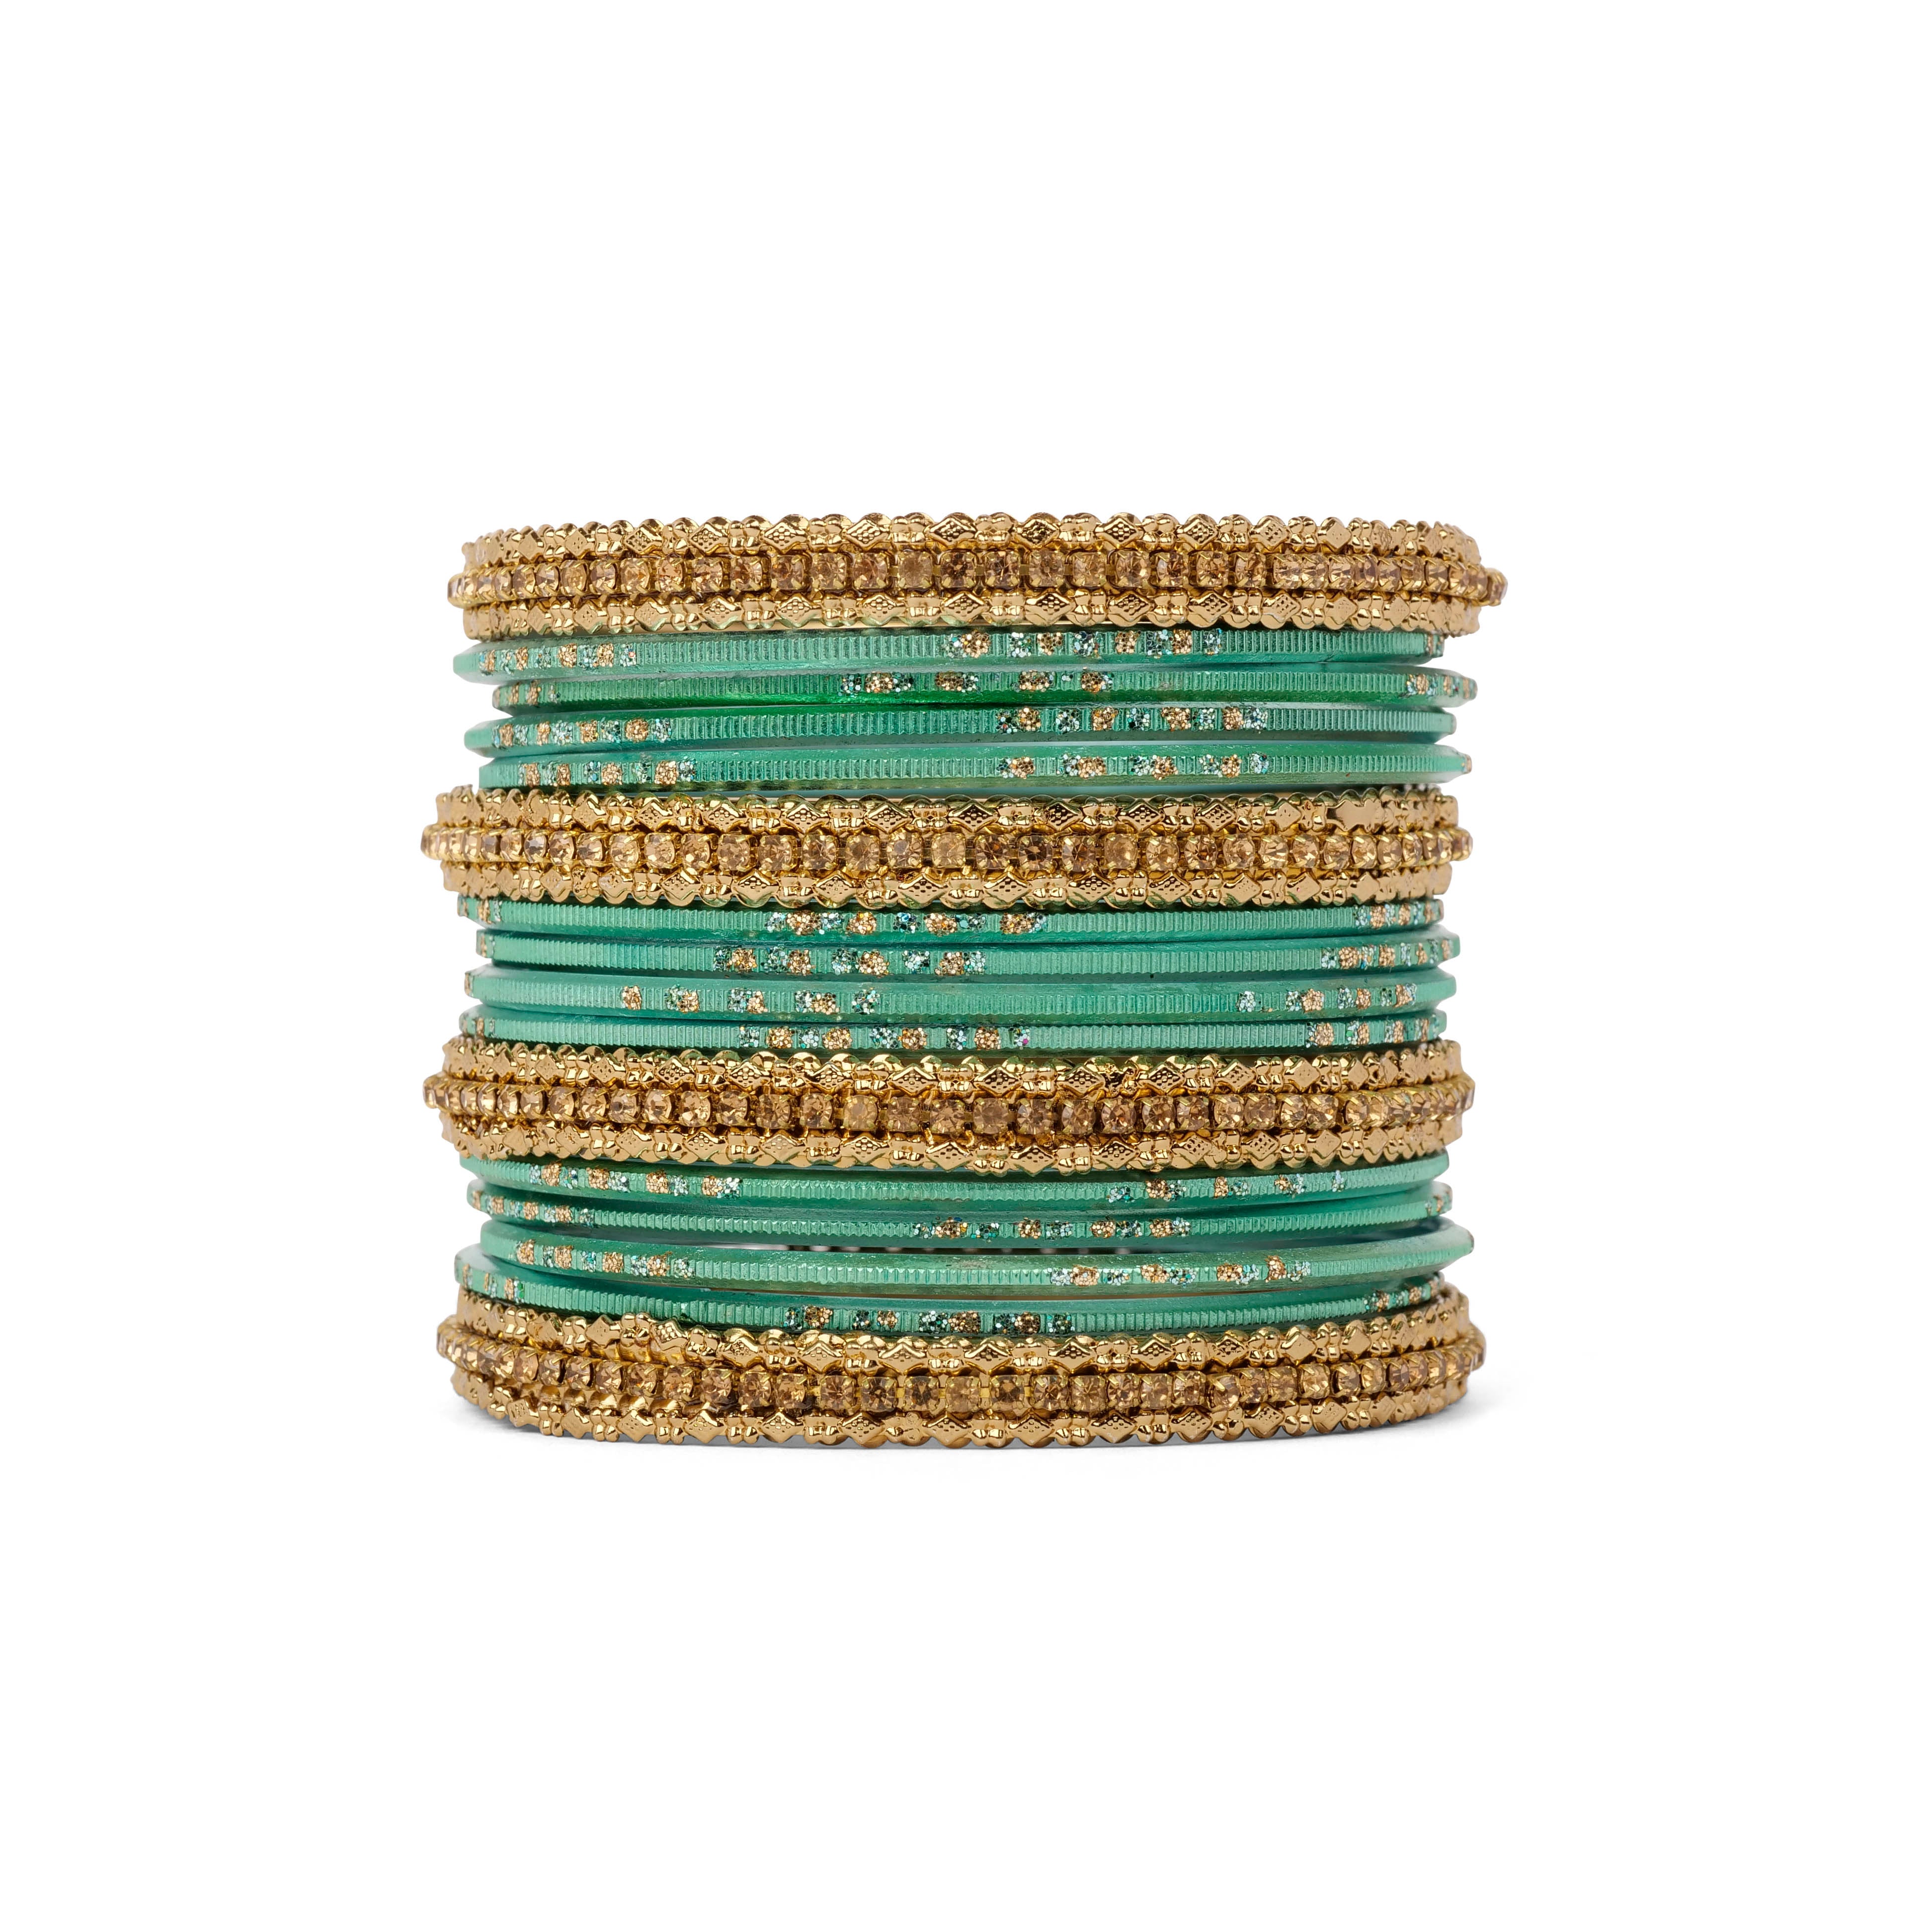 Simple Bangle Set in Teal and Antique Gold